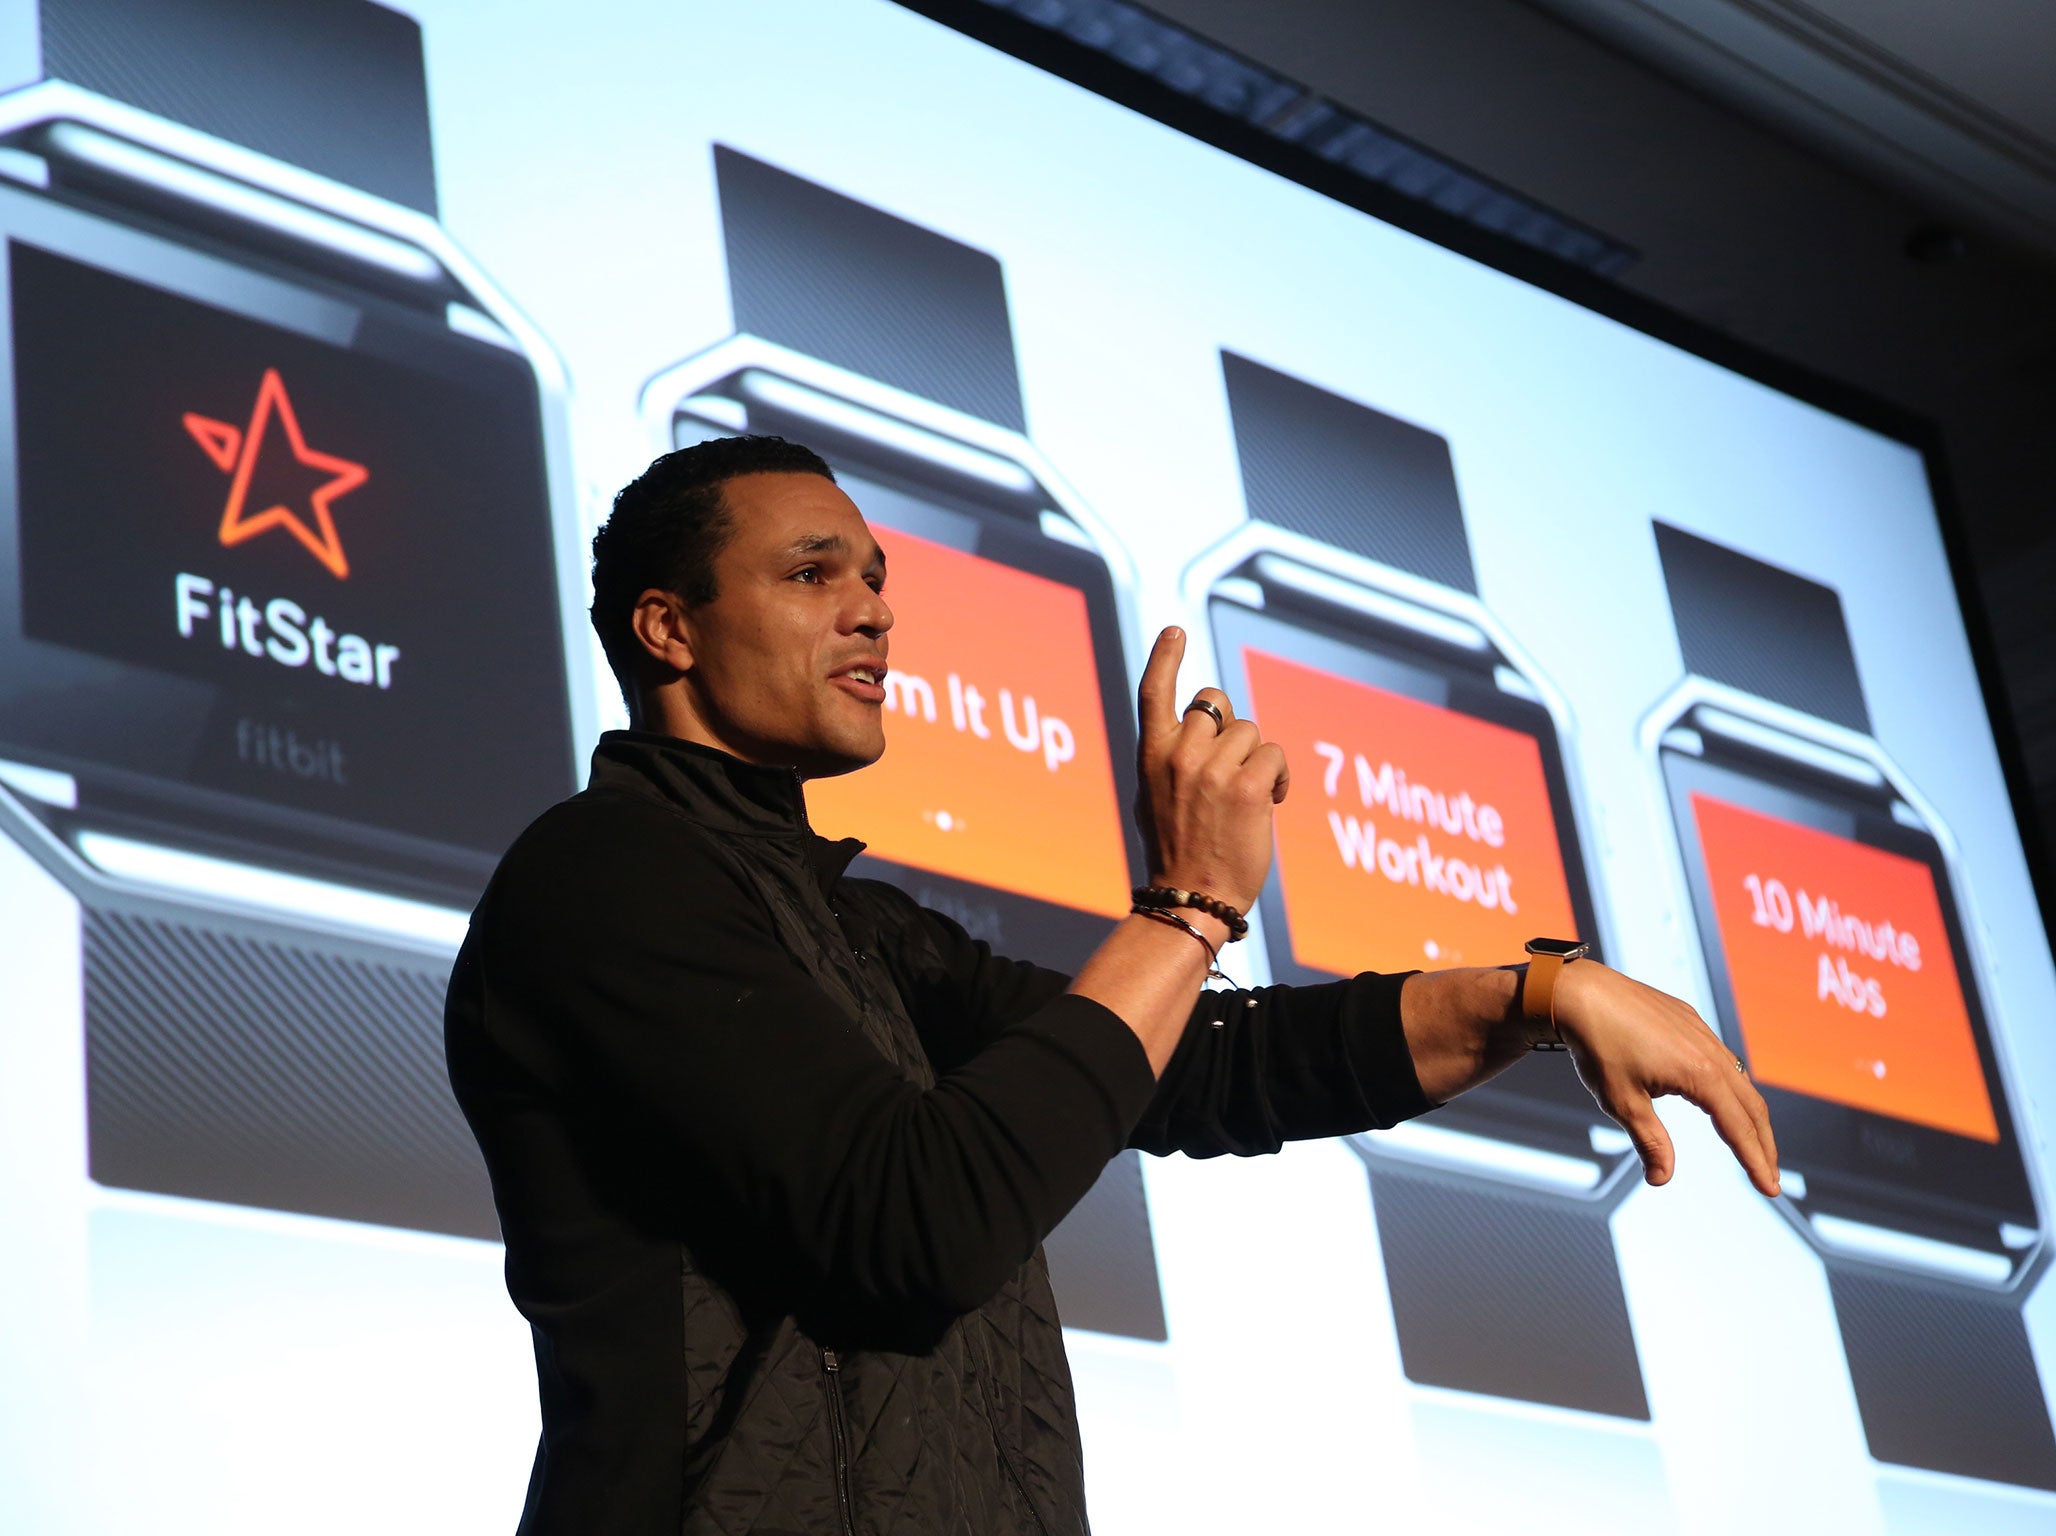 Television sports analyst and former NFL player Tony Gonzalez talks about the new FitBit Blaze at a press conference on CES Press Day, January 5, 2016 in Las Vegas, Nevada ahead of the CES 2016 Consumer Electronics Show.